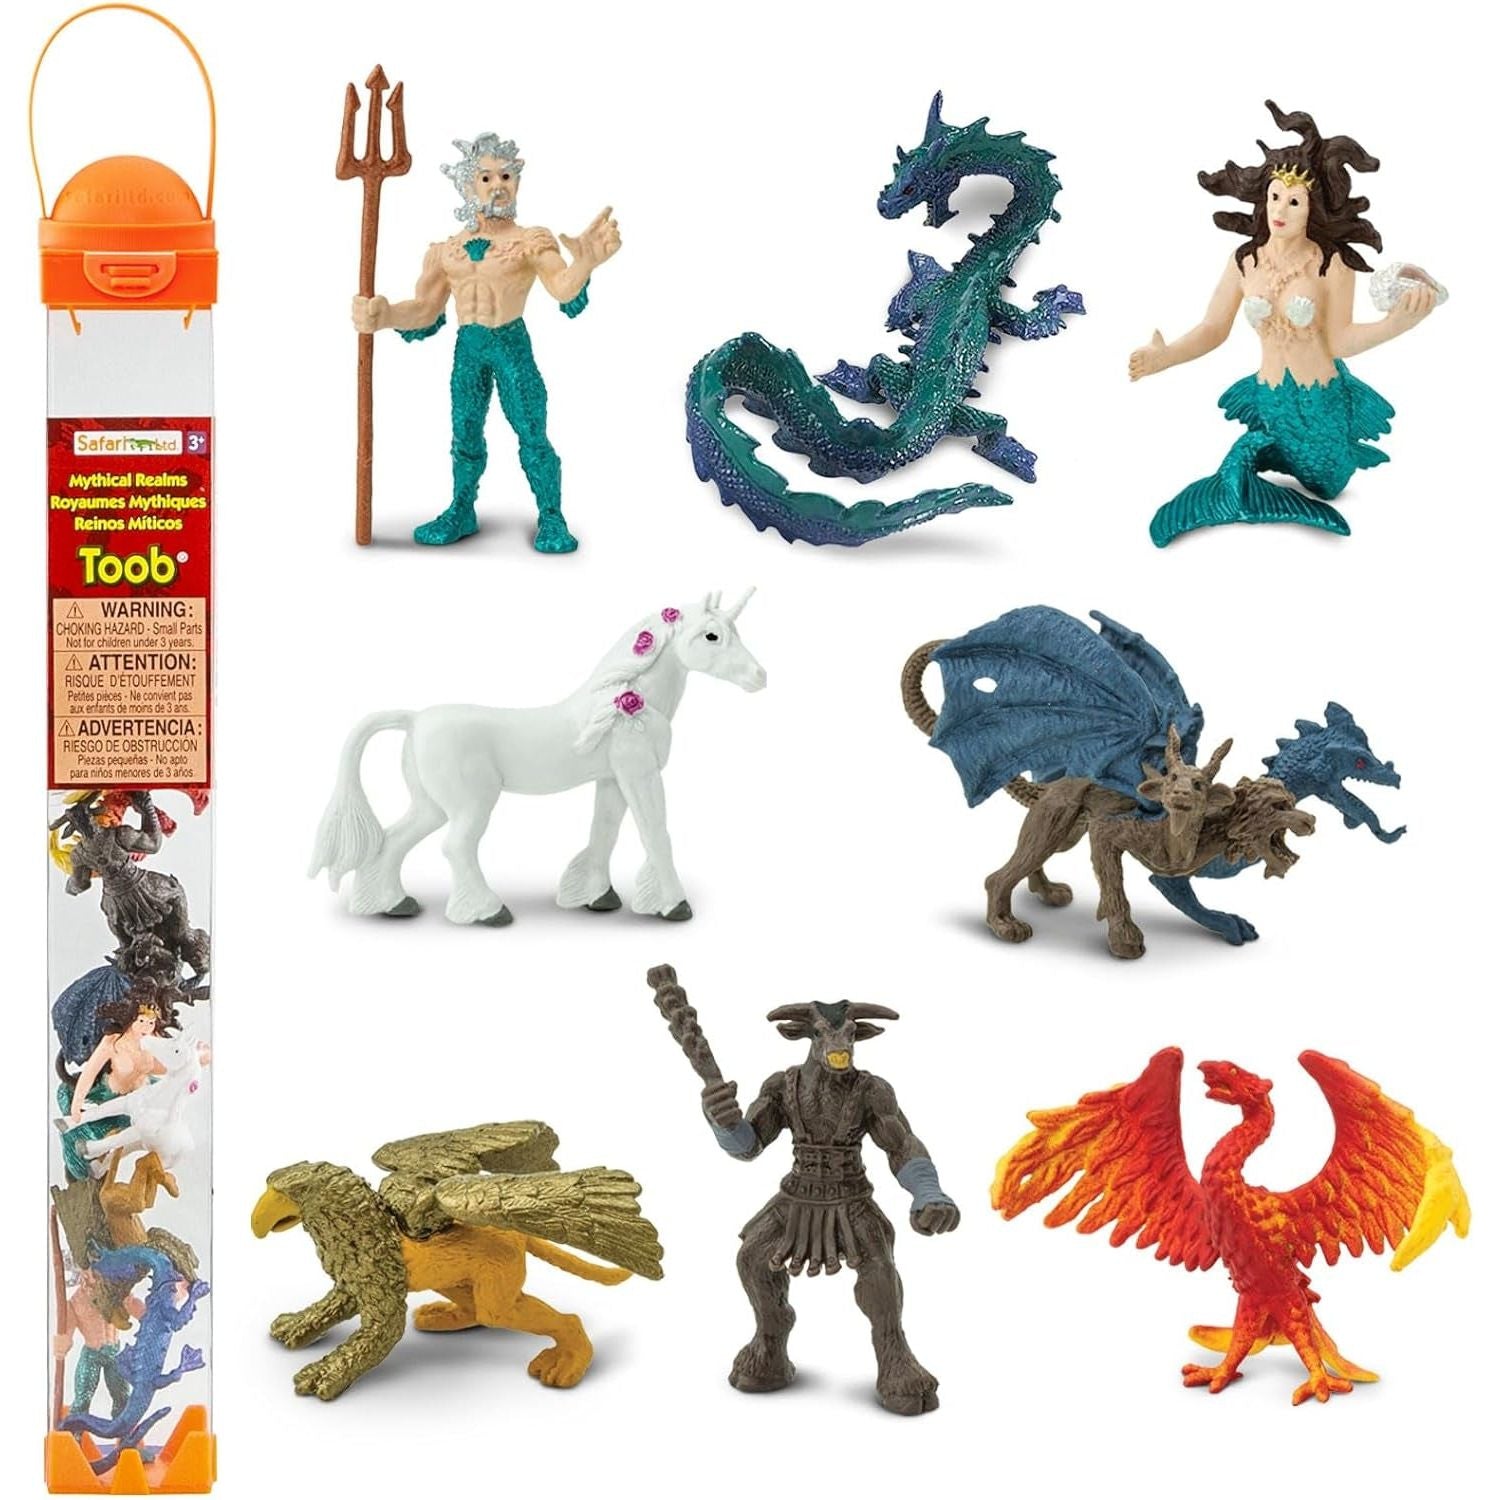 Mythical Realm Miniature Figures